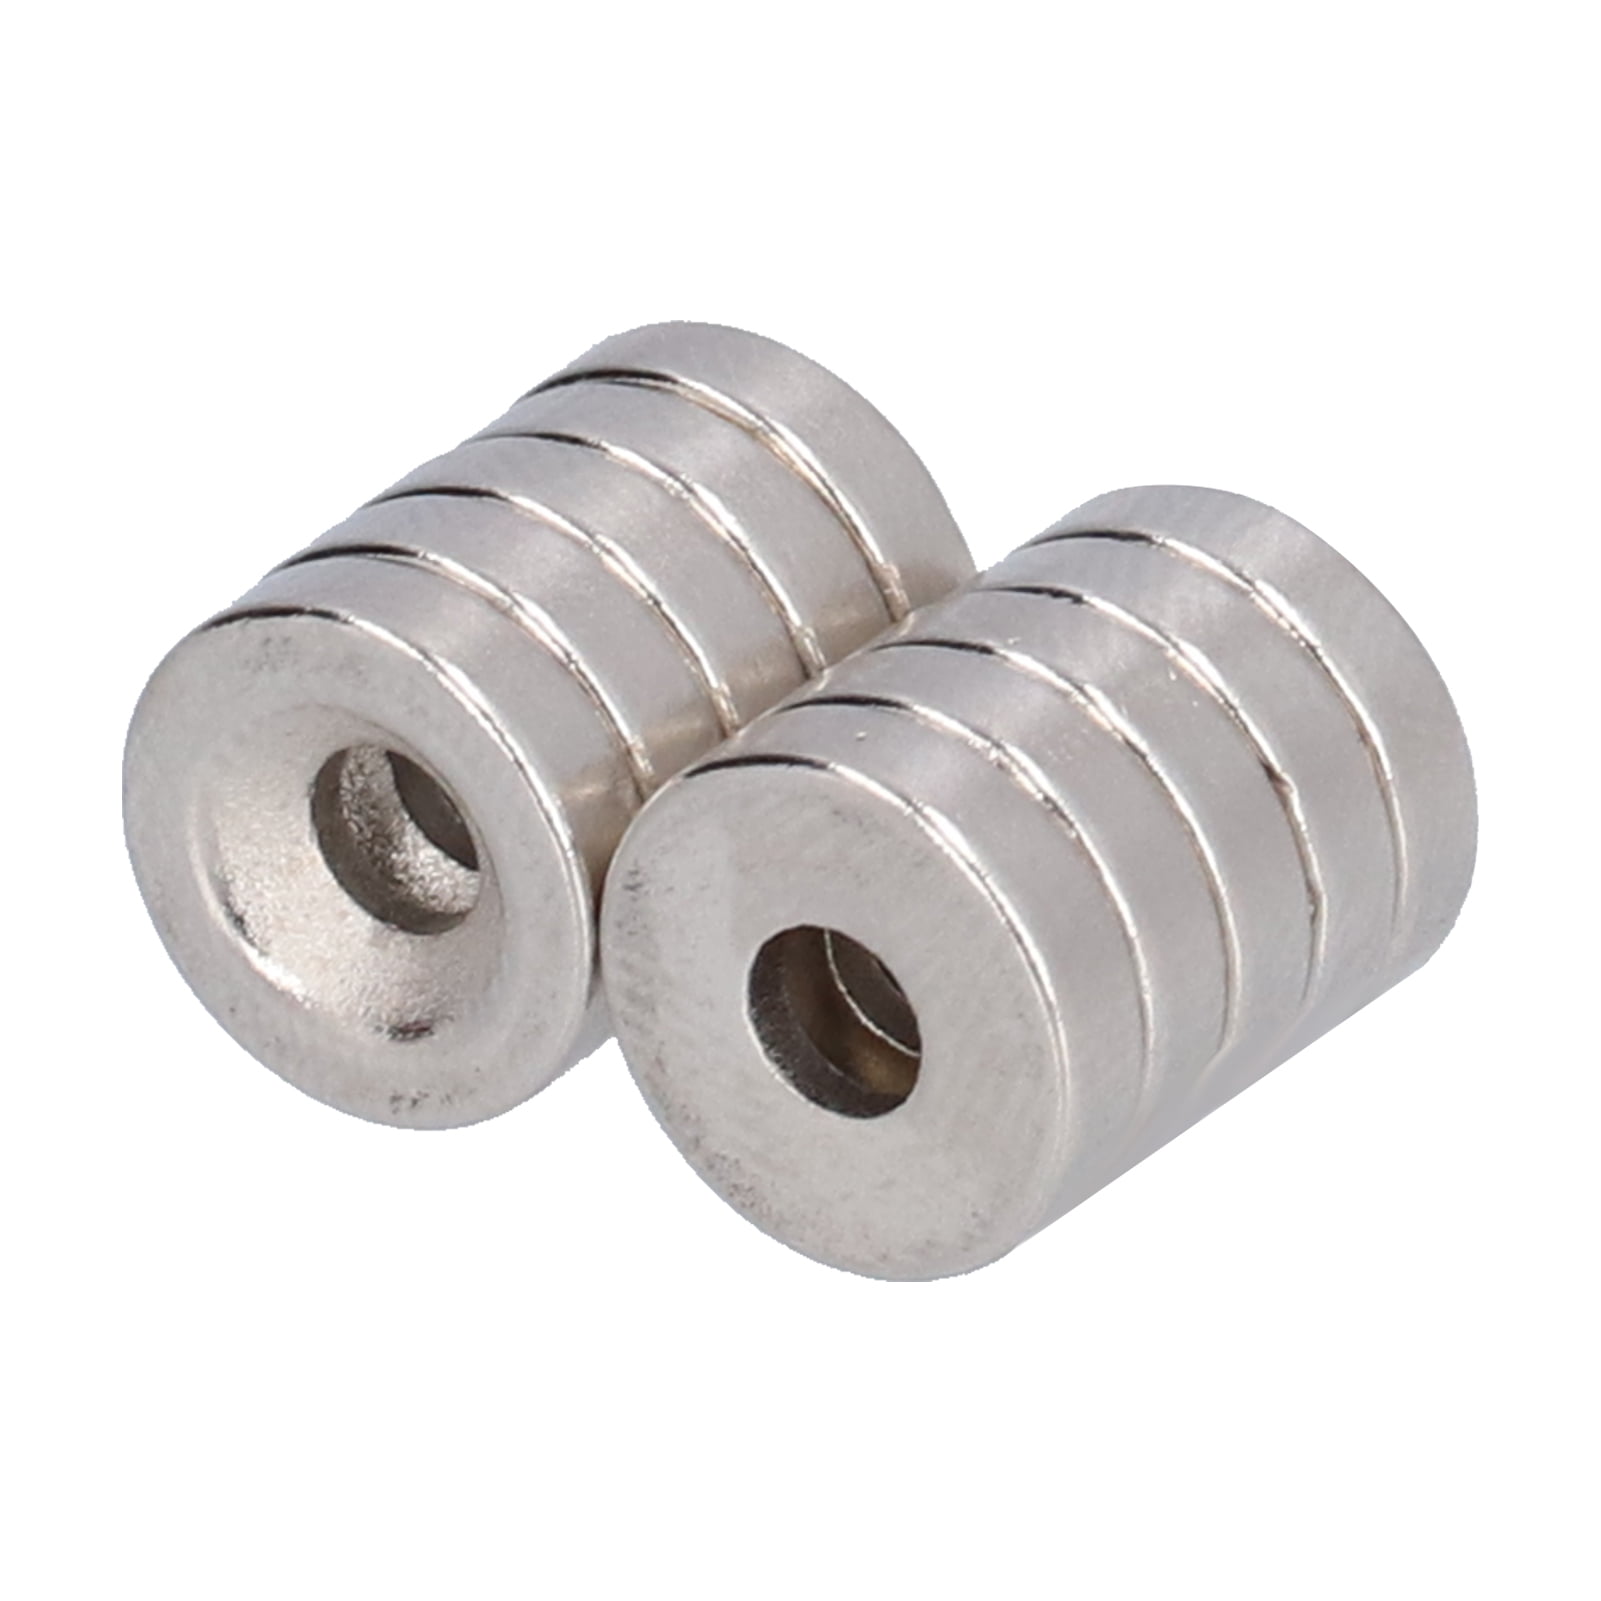 US Seller 5pcs N35 Strong Ring  Magnets Rare Earth Neodymium 20 x 3mm Hole 5mm 